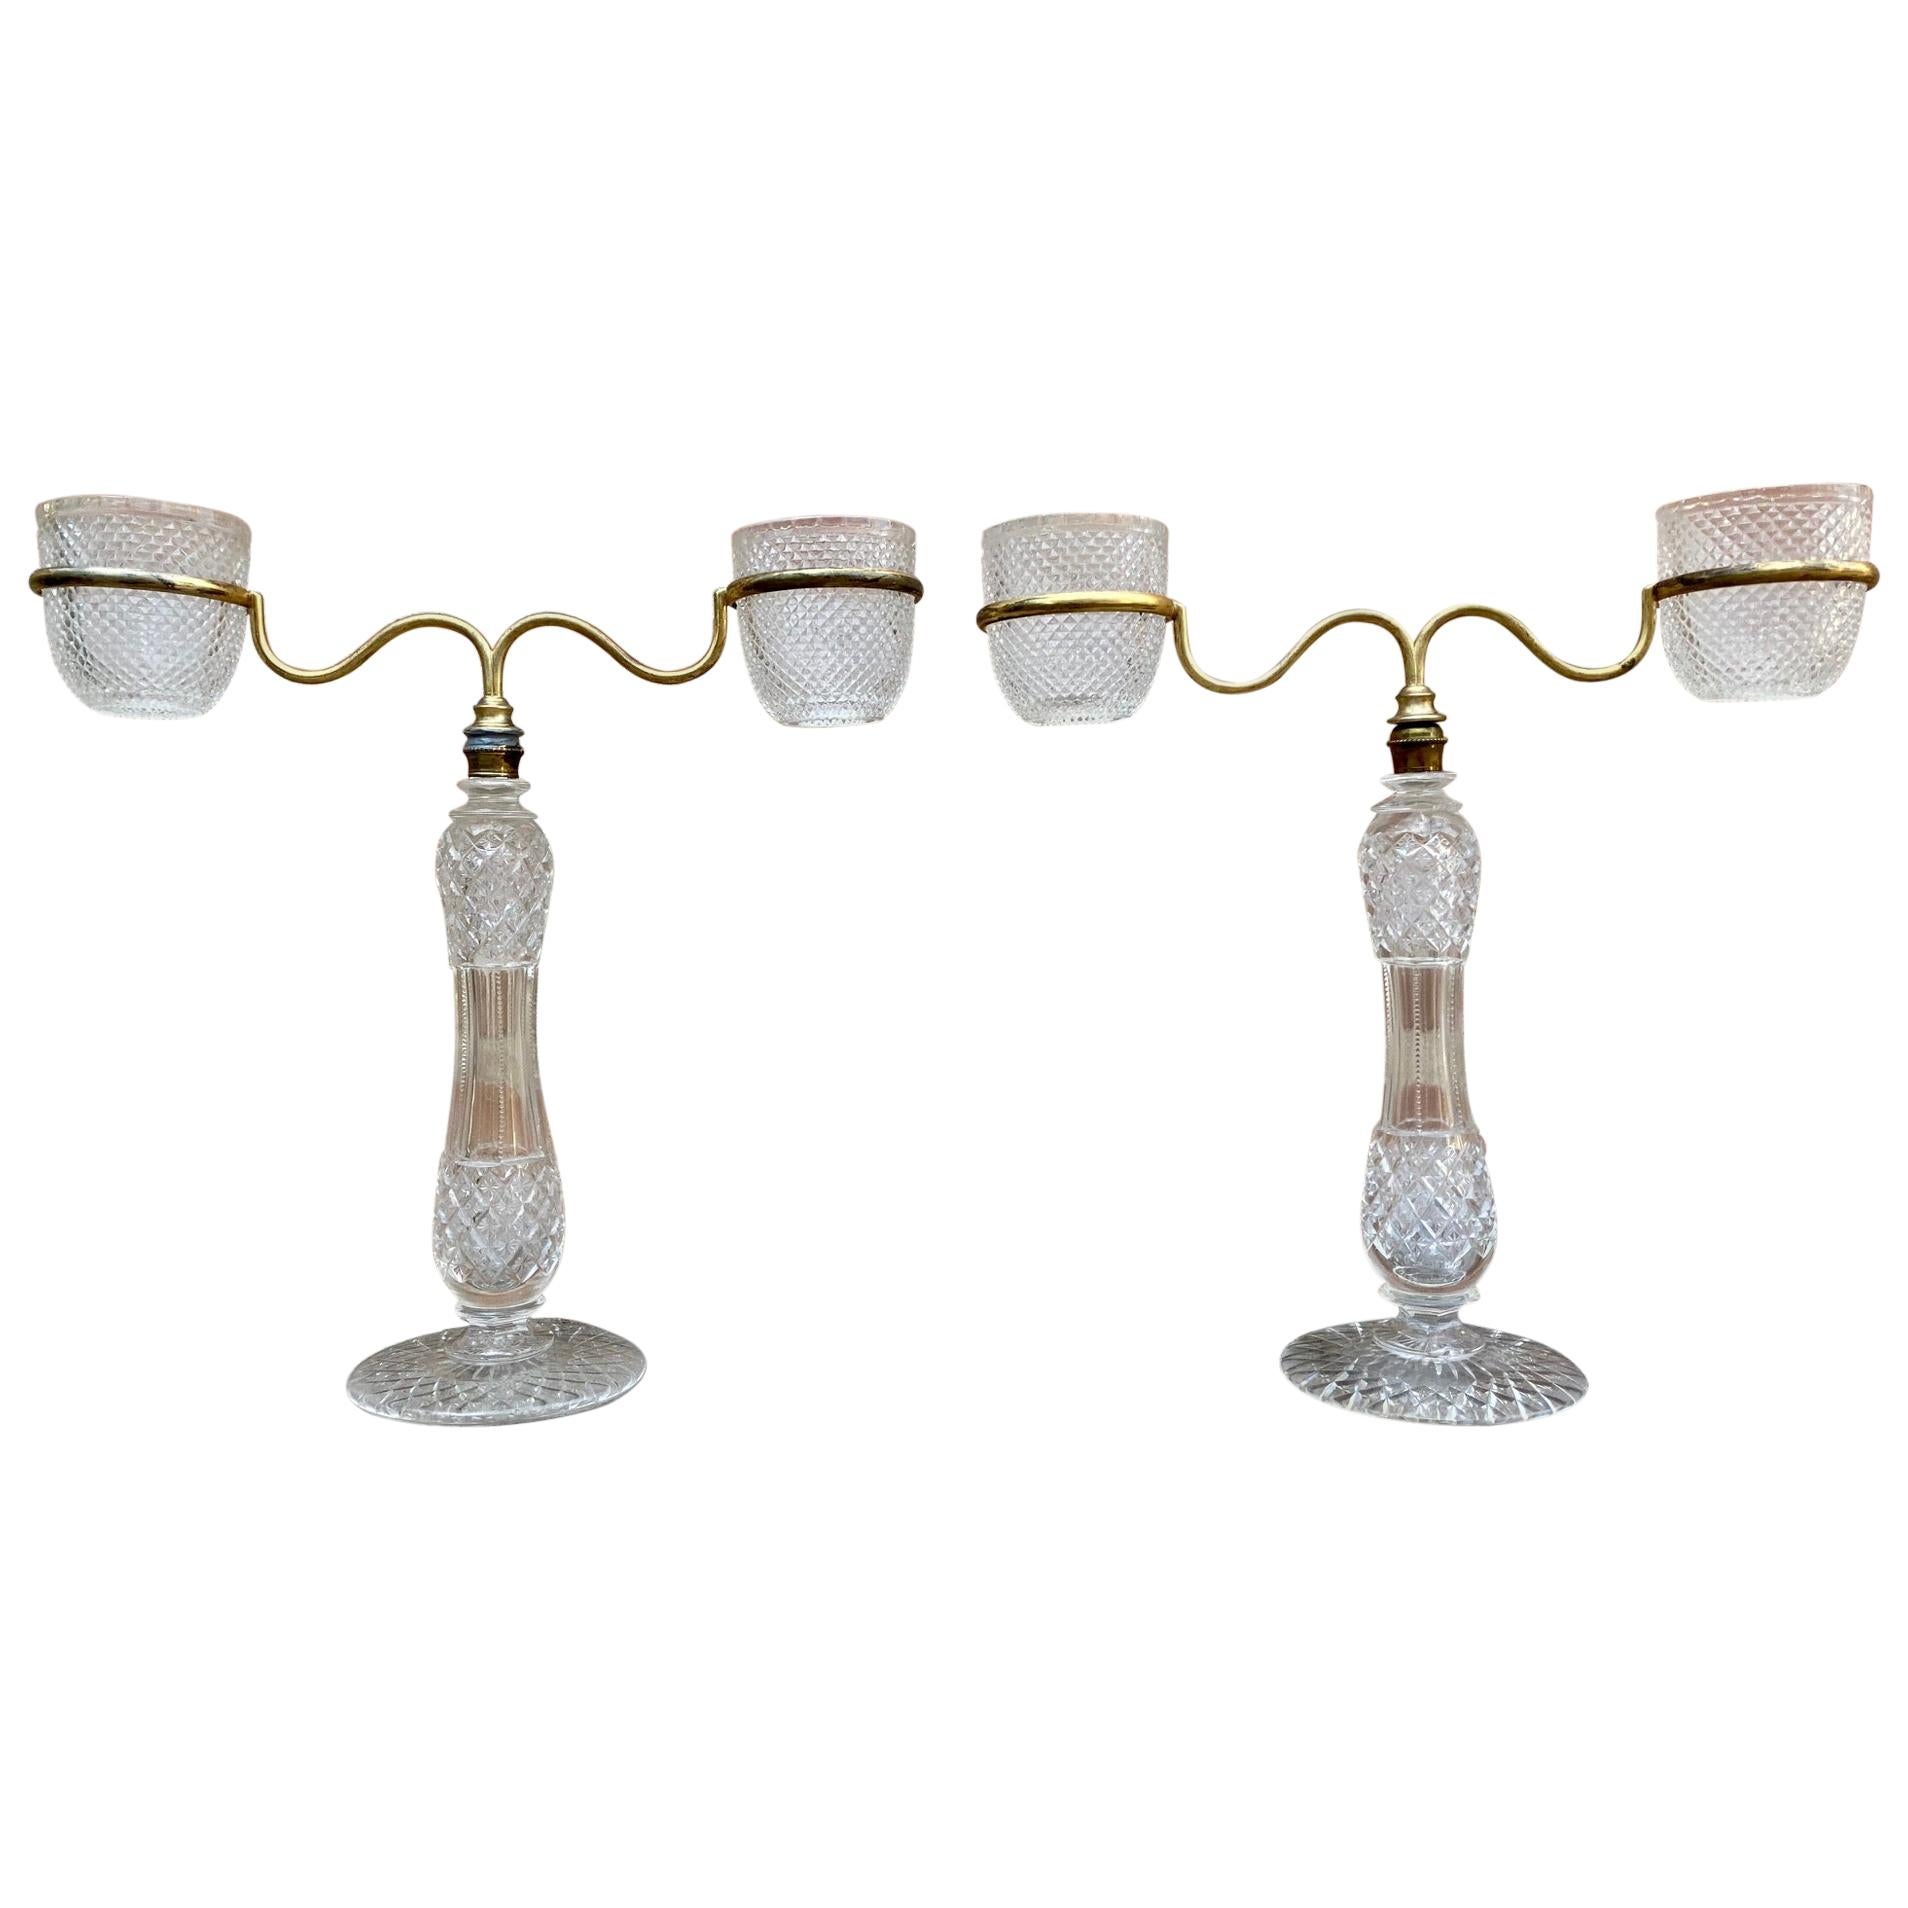 Late XIX Victorian Cut Glass Candleholder in Brass from Cricklite Clarke Trade For Sale